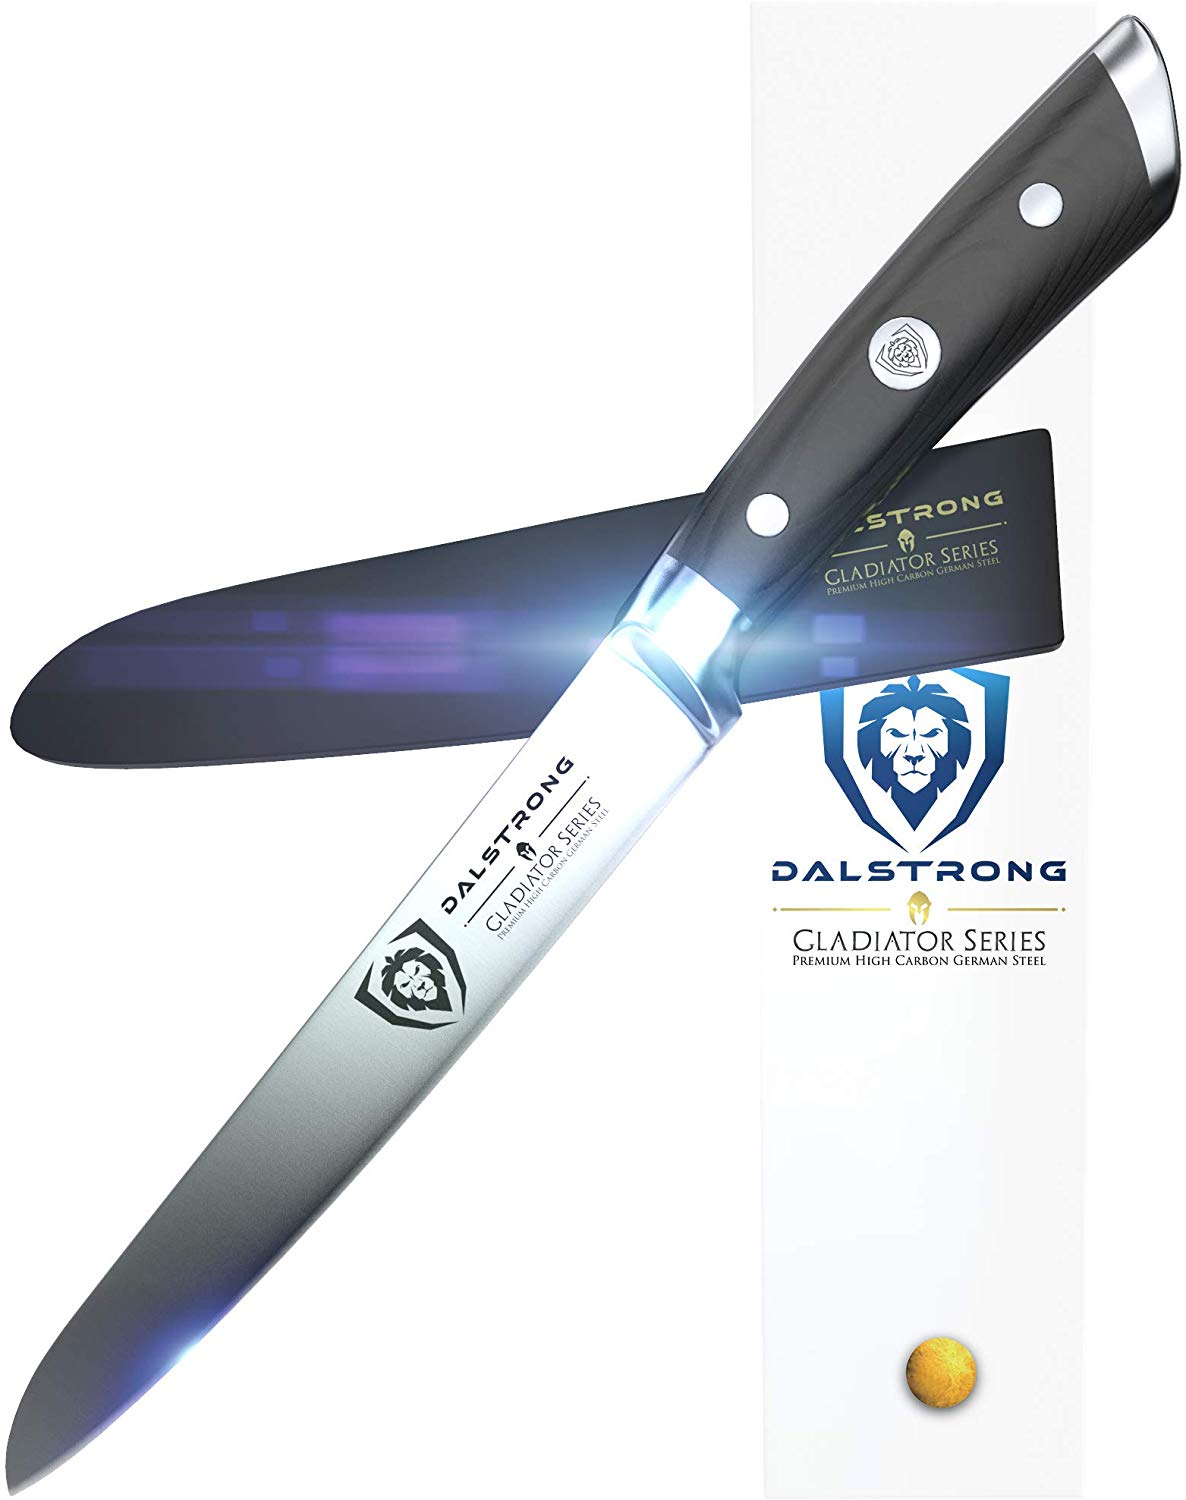 DALSTRONG 6-in Gladiator Utility Knife